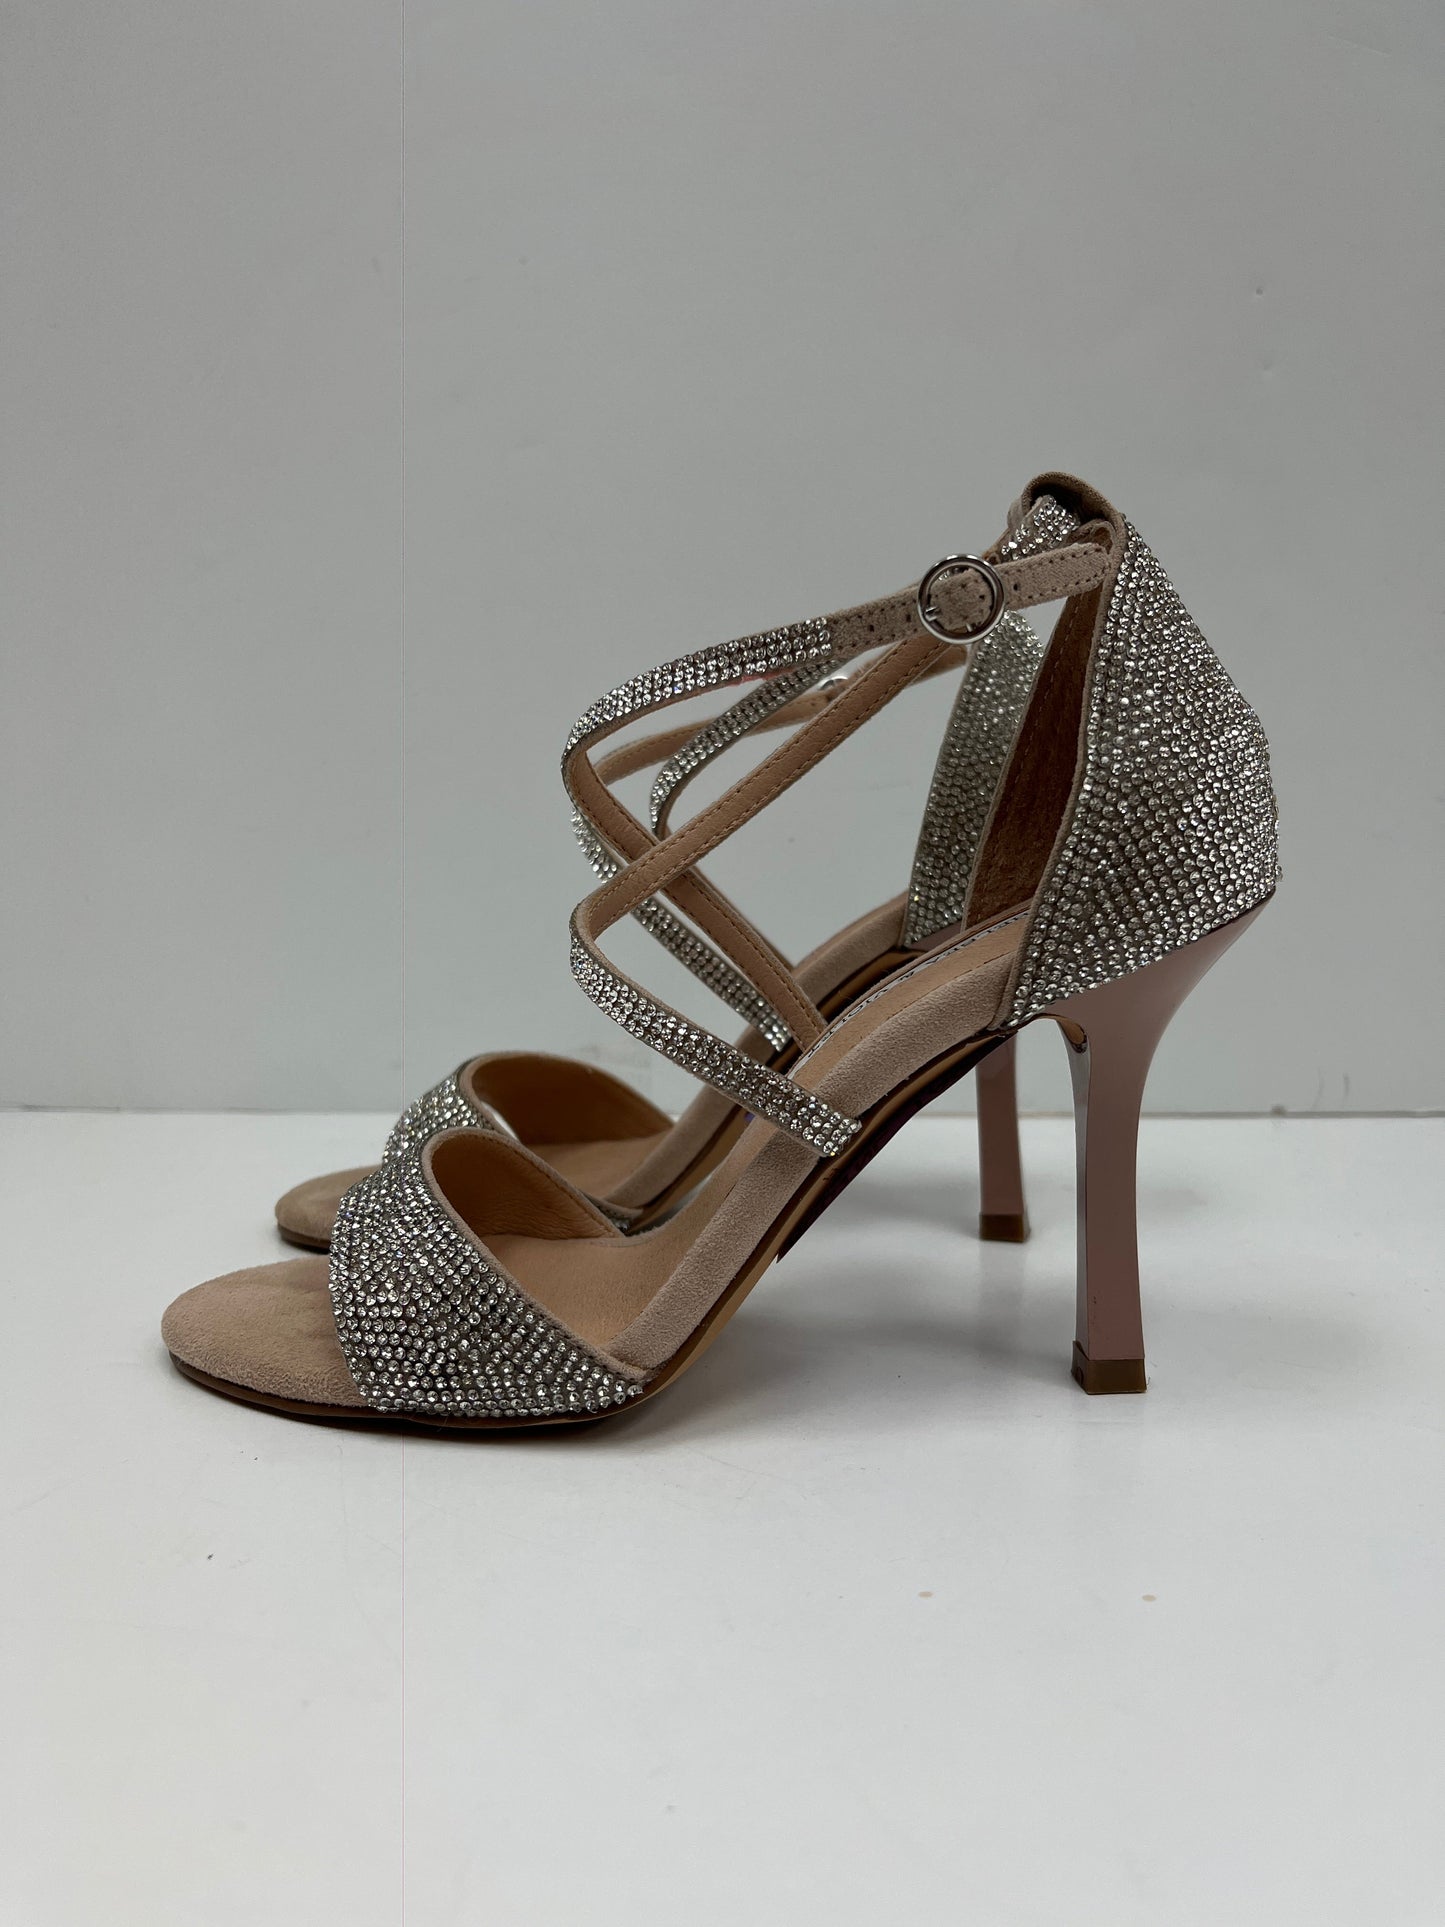 Shoes Heels Stiletto By Chelsea And Theodore  Size: 5.5